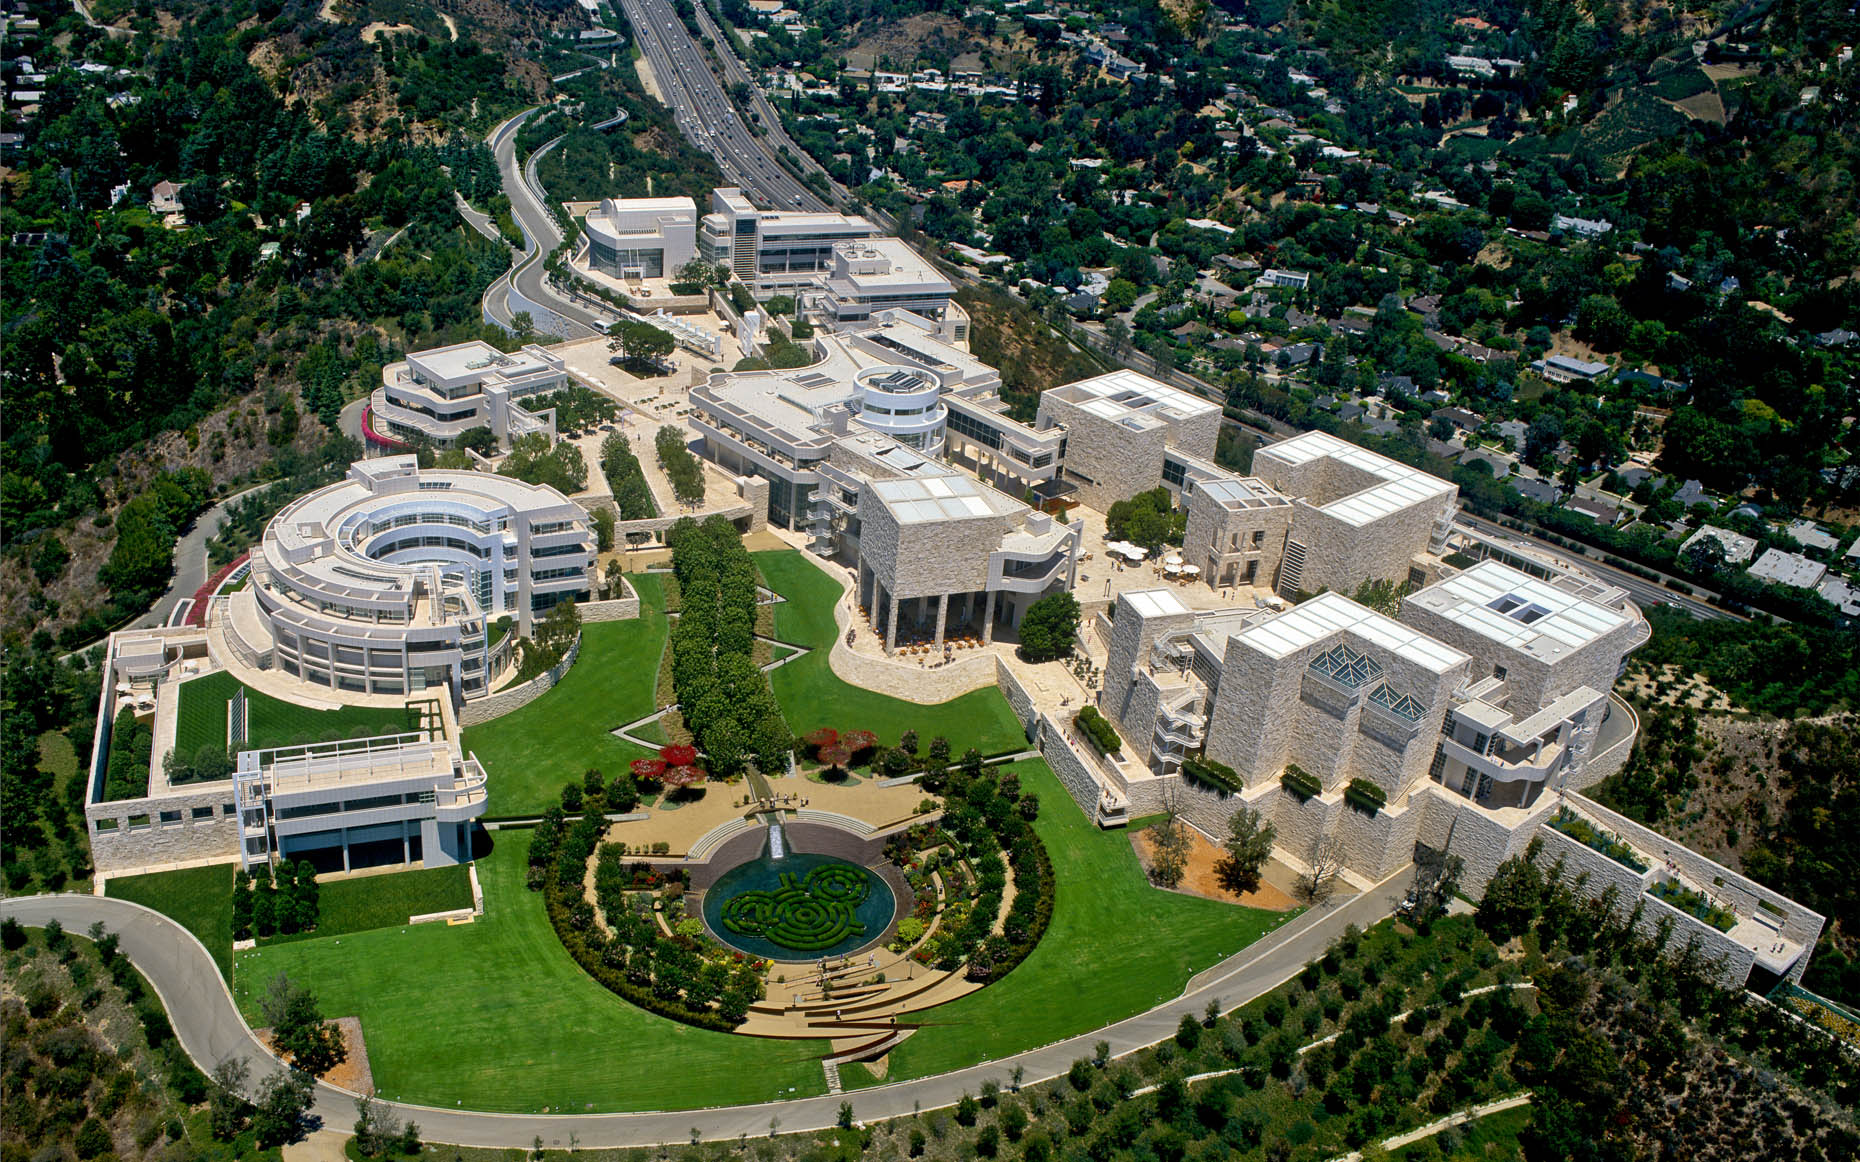 J. Paul Getty Museum Los Angeles CA - Aerial photogroahy by Stefen Turner